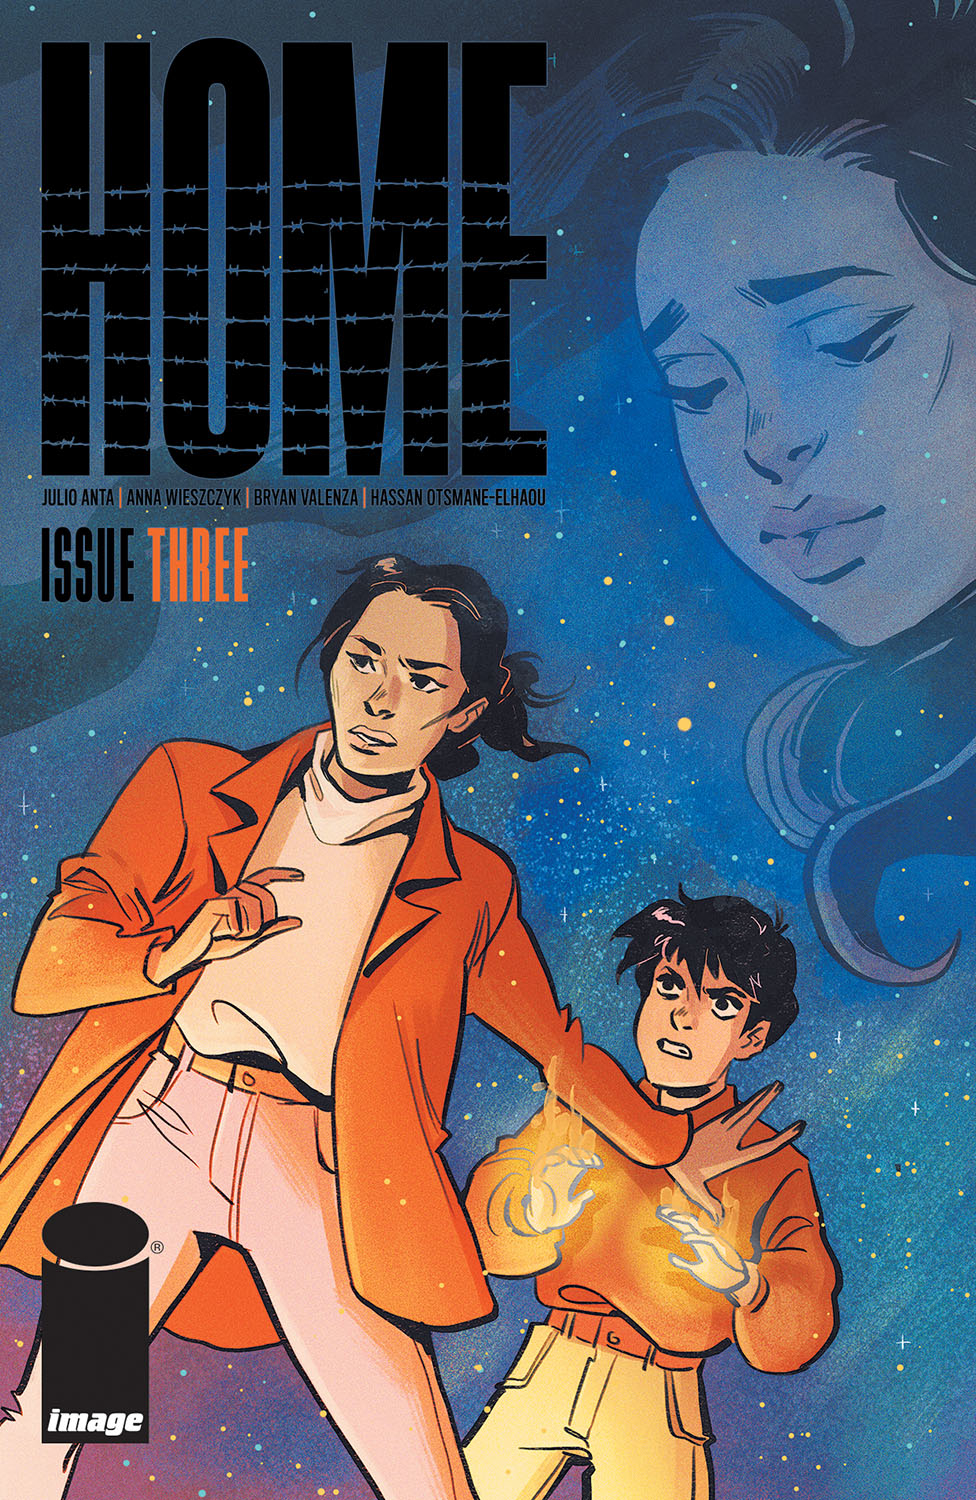 Home #3 Cover A Sterle (Of 5)